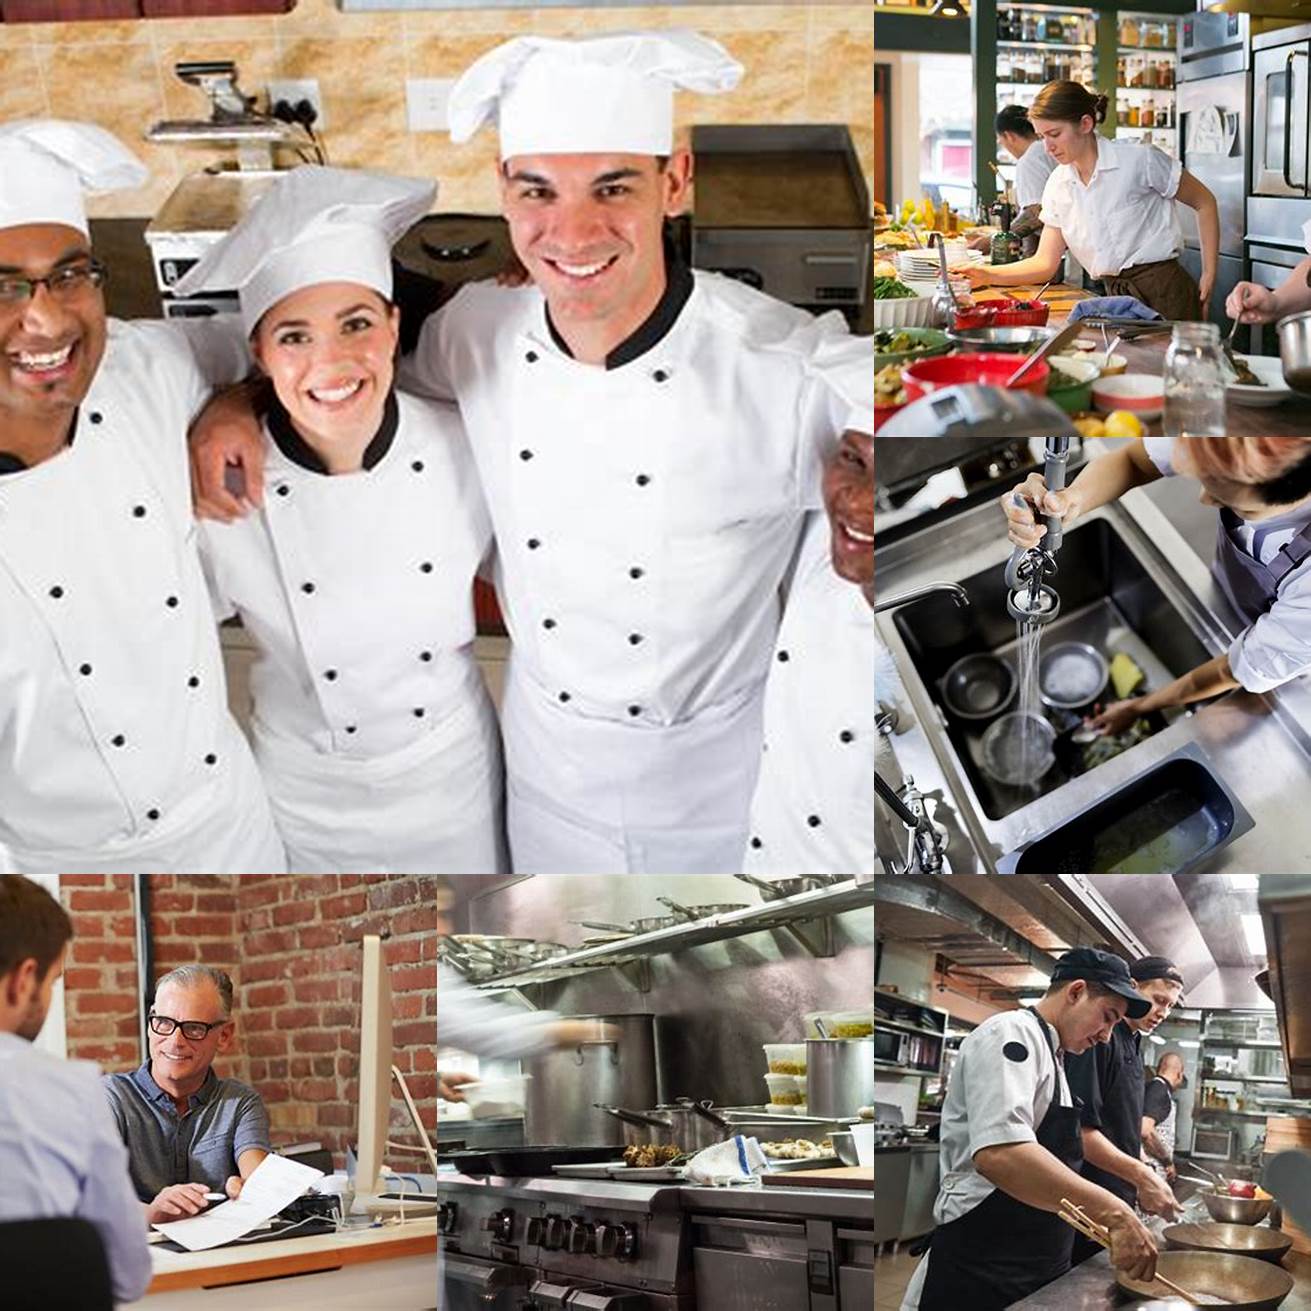 3 Staffing challenges Running a commercial kitchen requires a skilled and experienced staff which can be difficult to find and retain